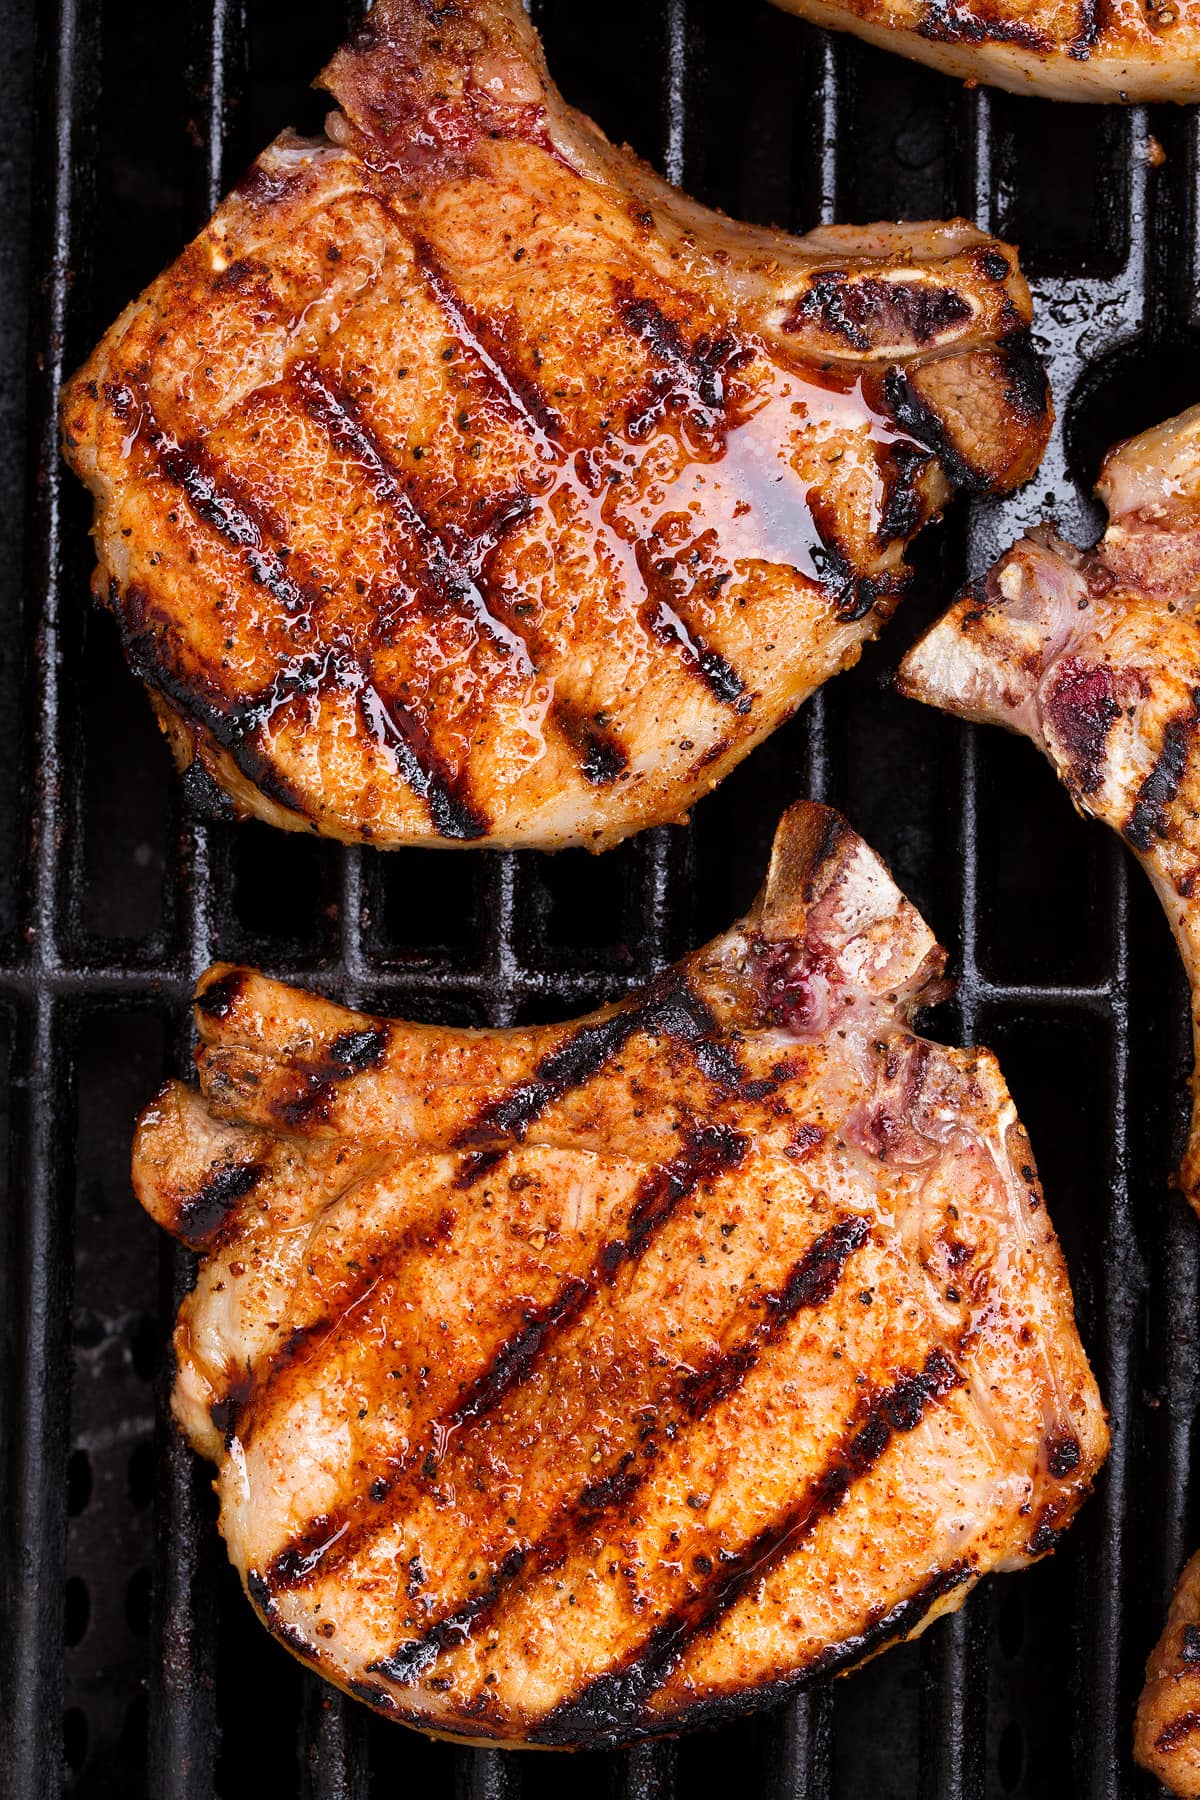 Overhead close up image of two pork chops on a grill.